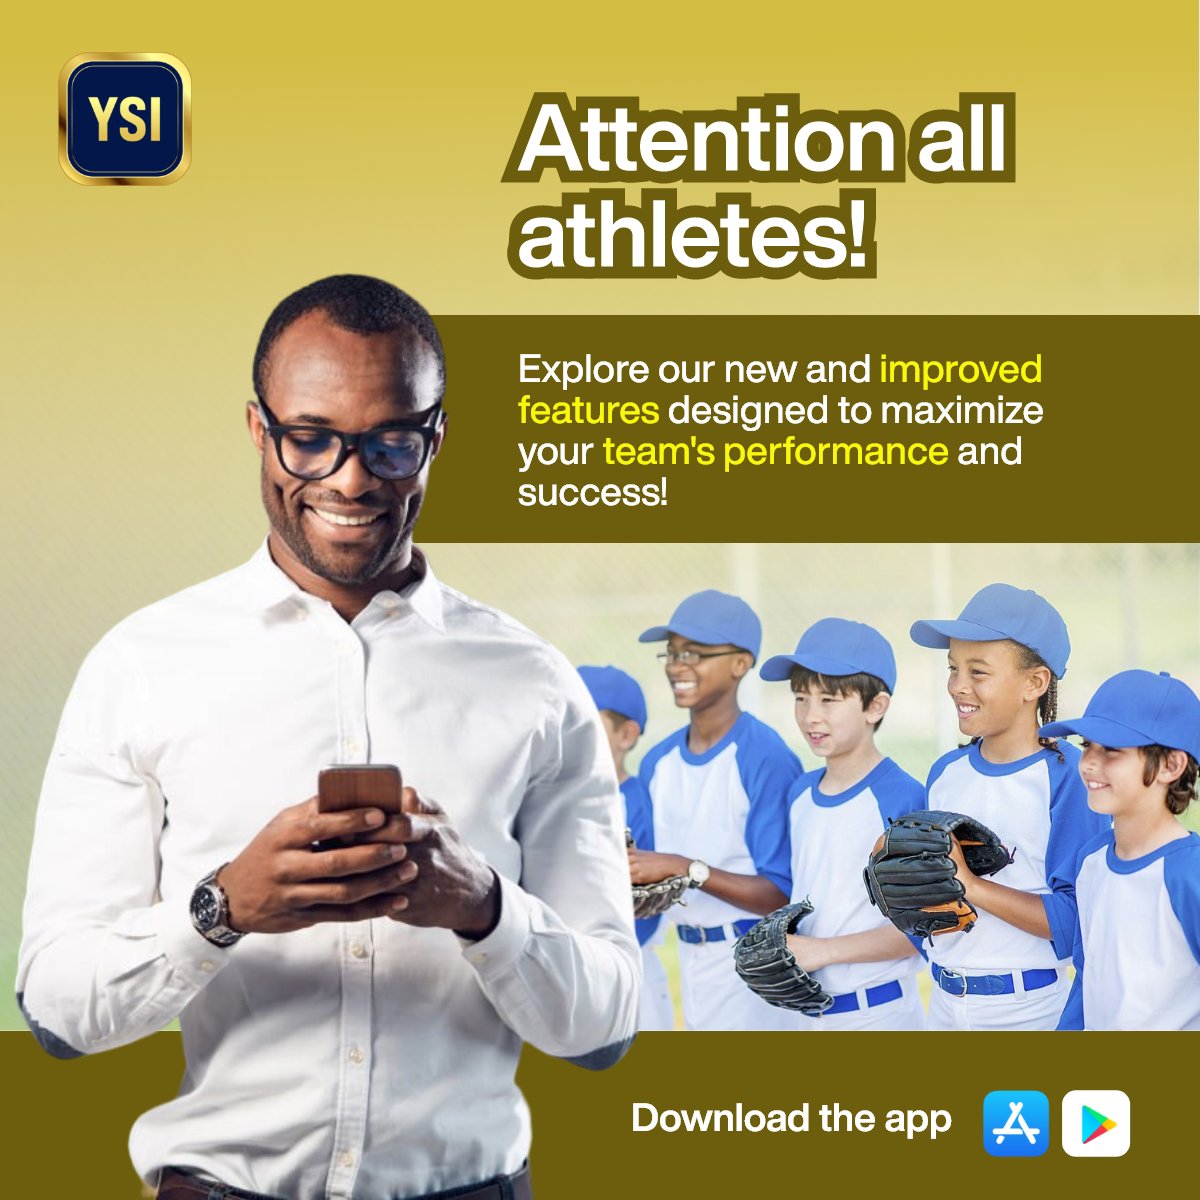 Attention all athletes! Explore our new features crafted to elevate your team's performance and drive success to new heights! 

Download the app
iOS- apple.co/3Wd3nop
Google- bit.ly/3BxFvTO

#youthsportsindex #ExcellenceInSports #AthleticAchievement #sportstrainer